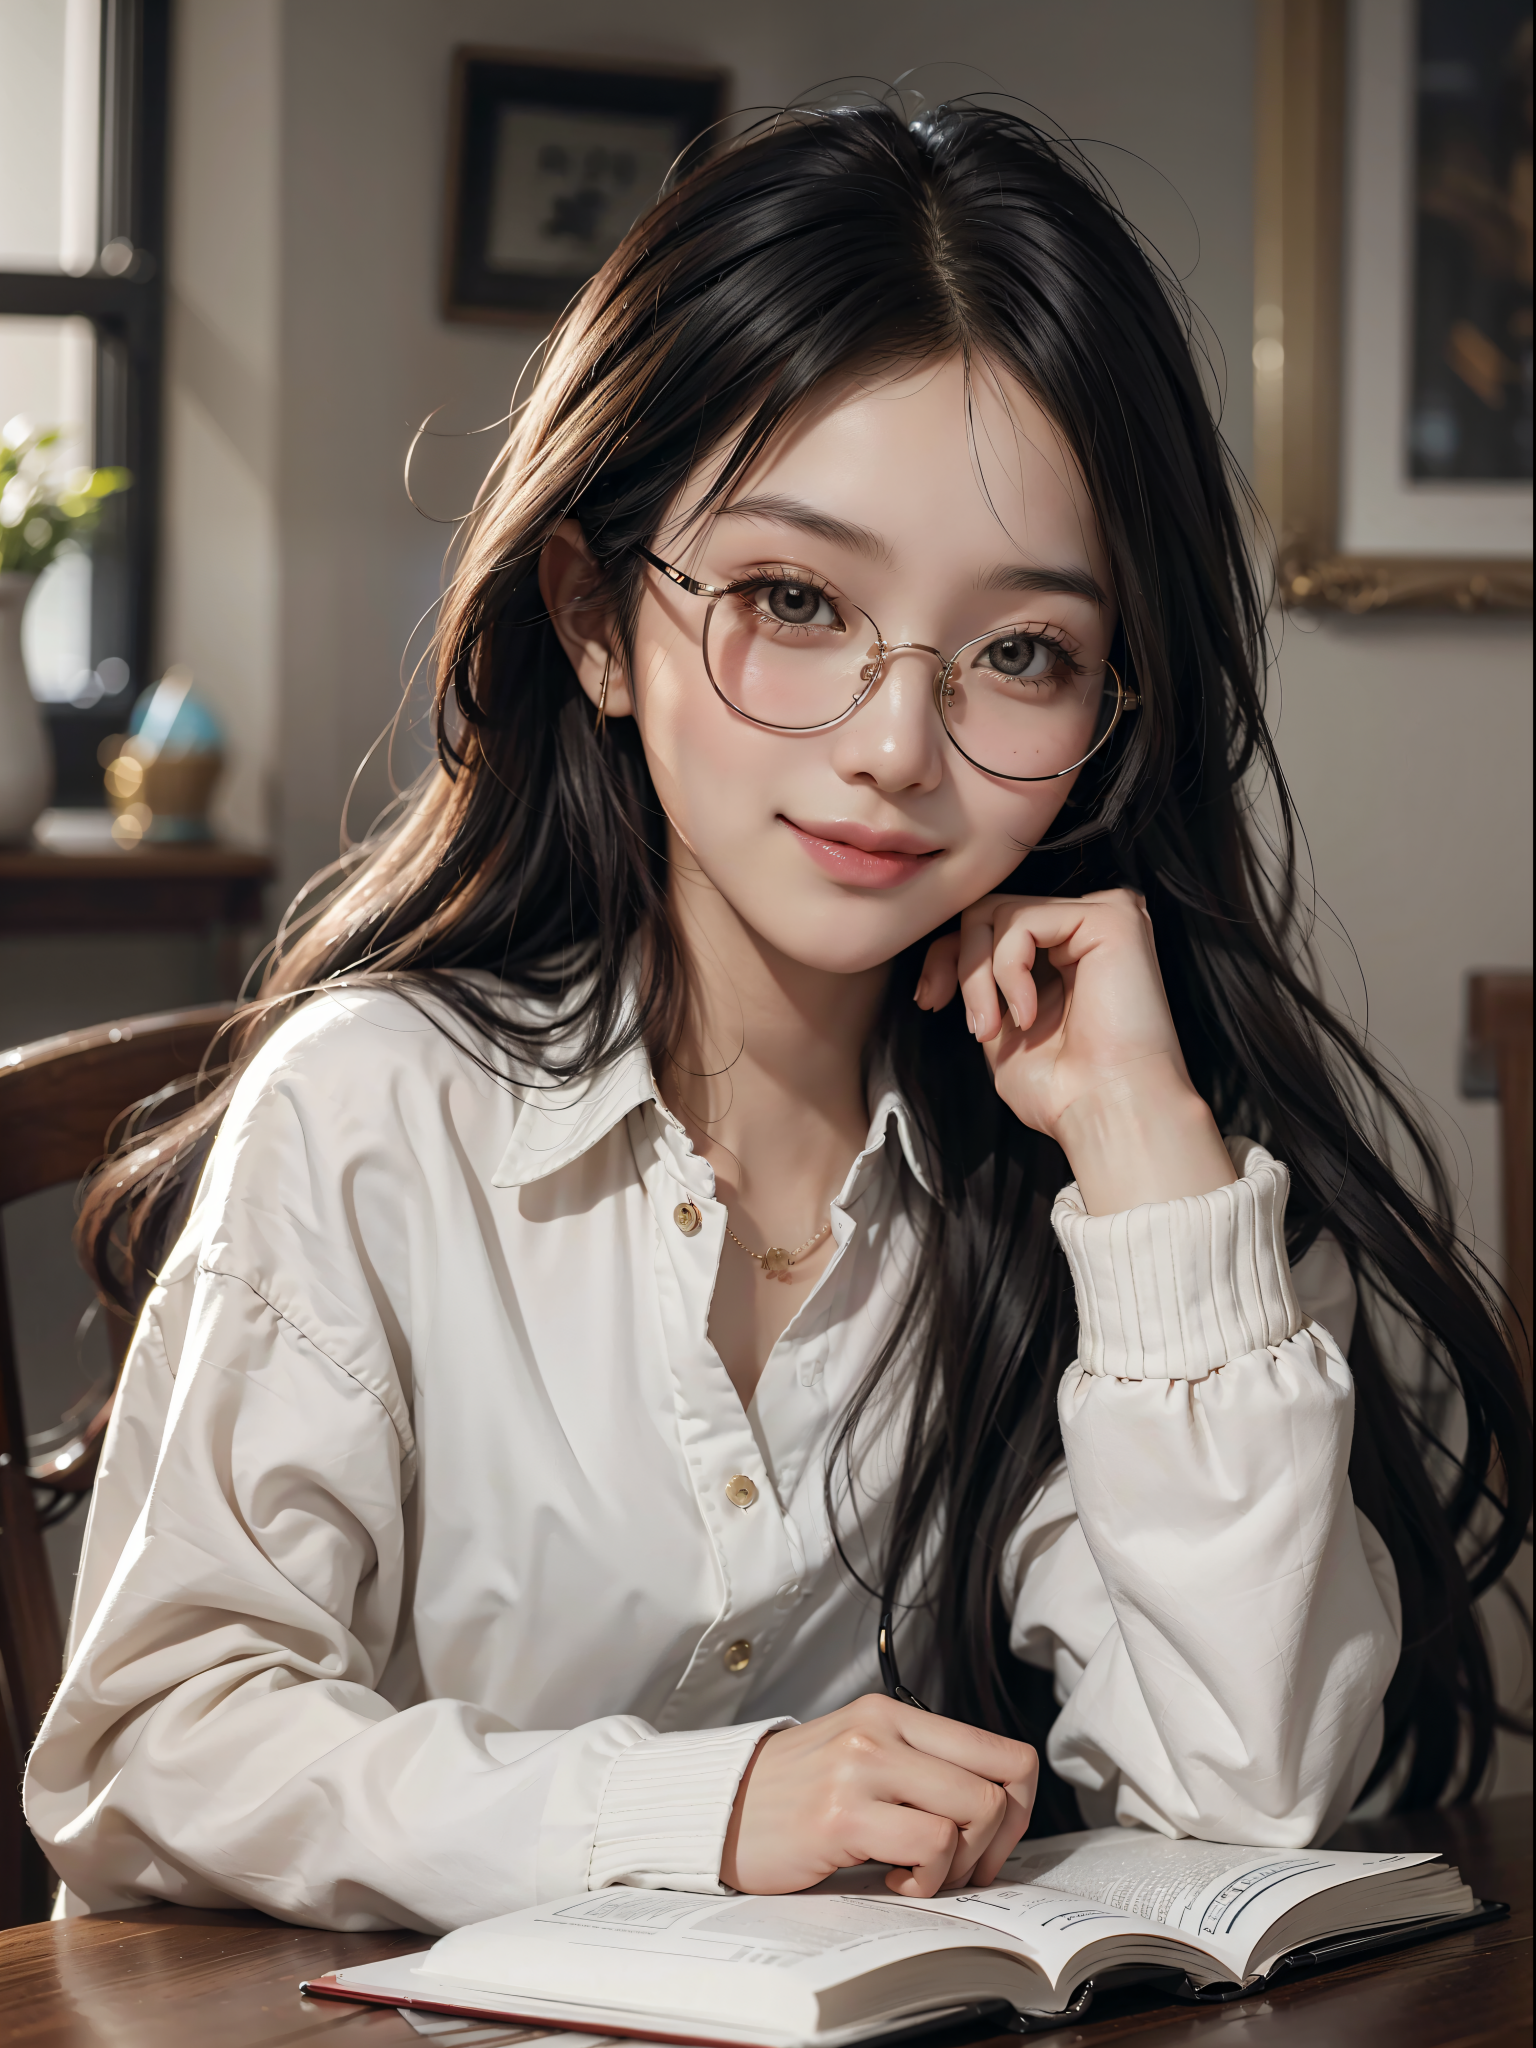 General 1536x2048 AI art dress Asian women portrait display long hair glasses sitting smiling looking at viewer chair window blurred blurry background